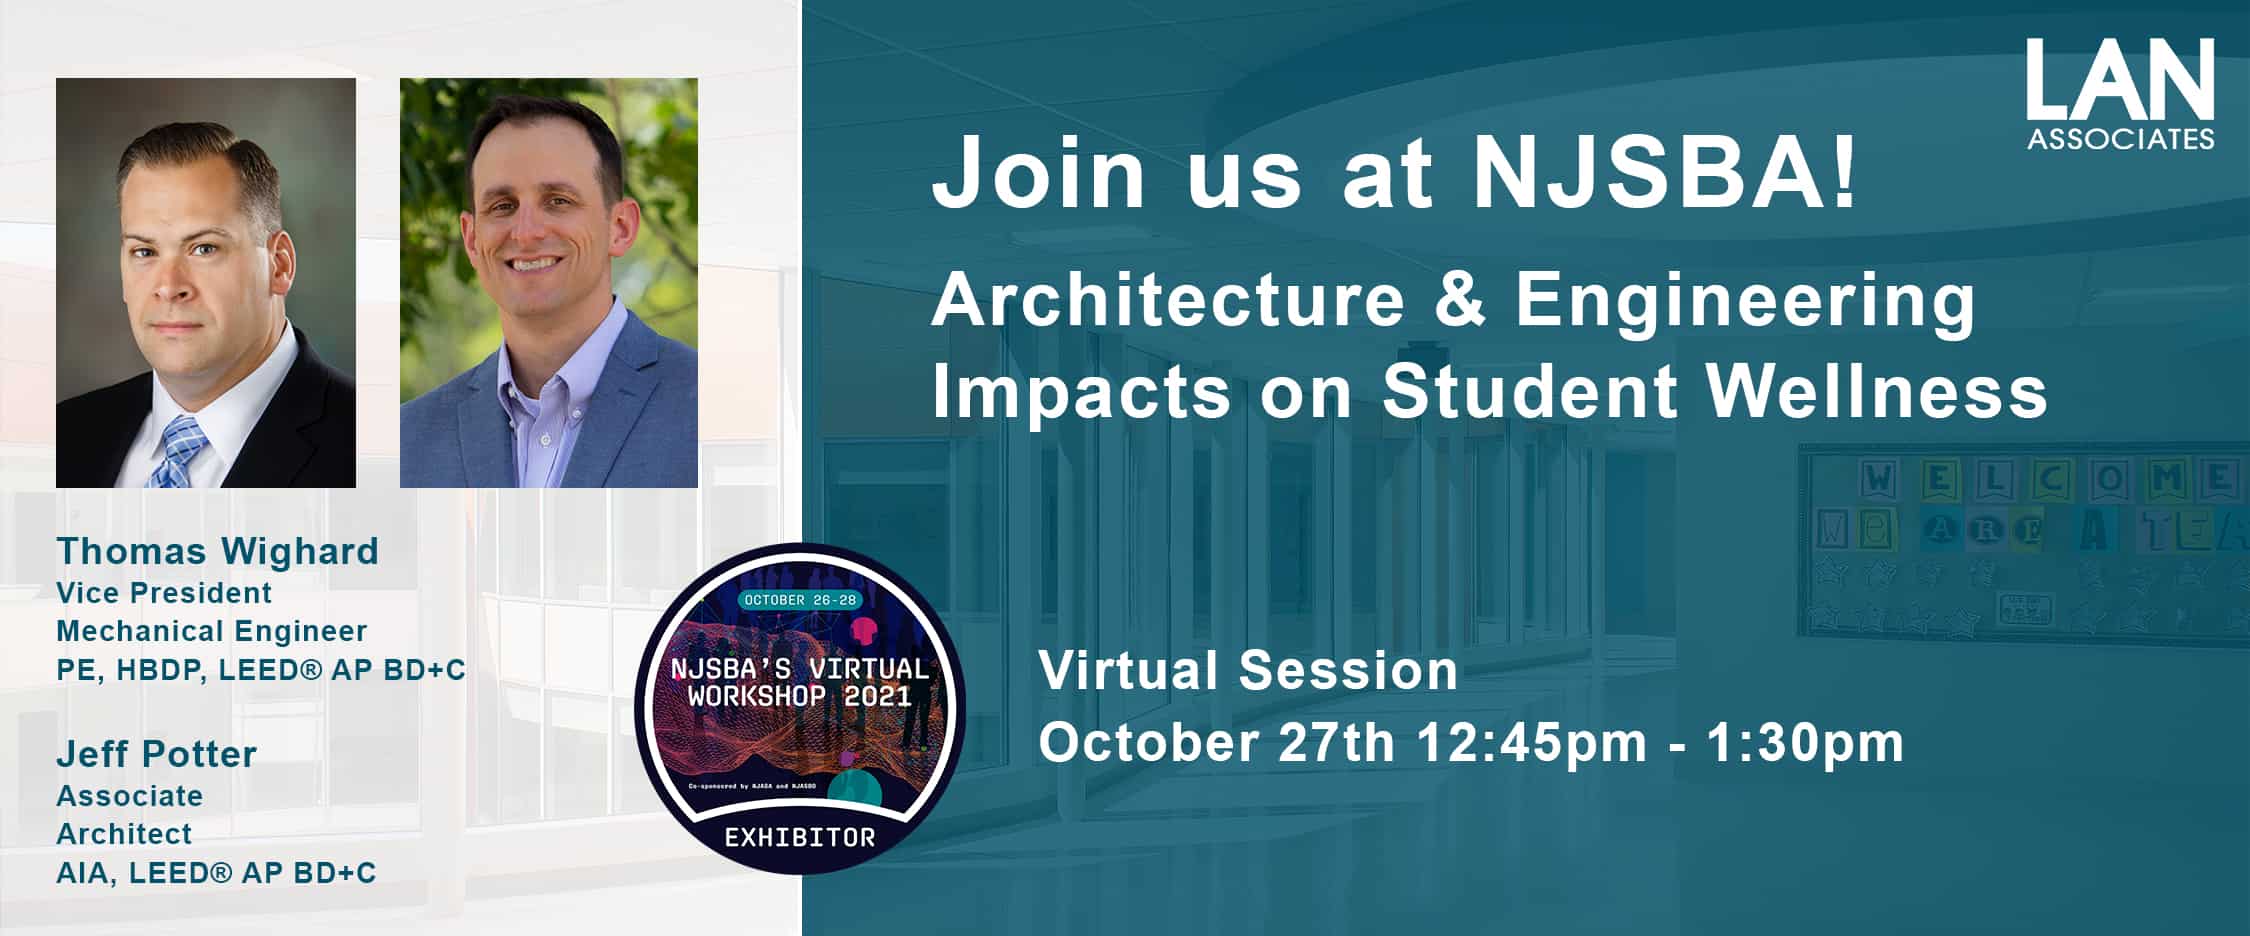 LAN at the NJSBA - Join our virtual workshop